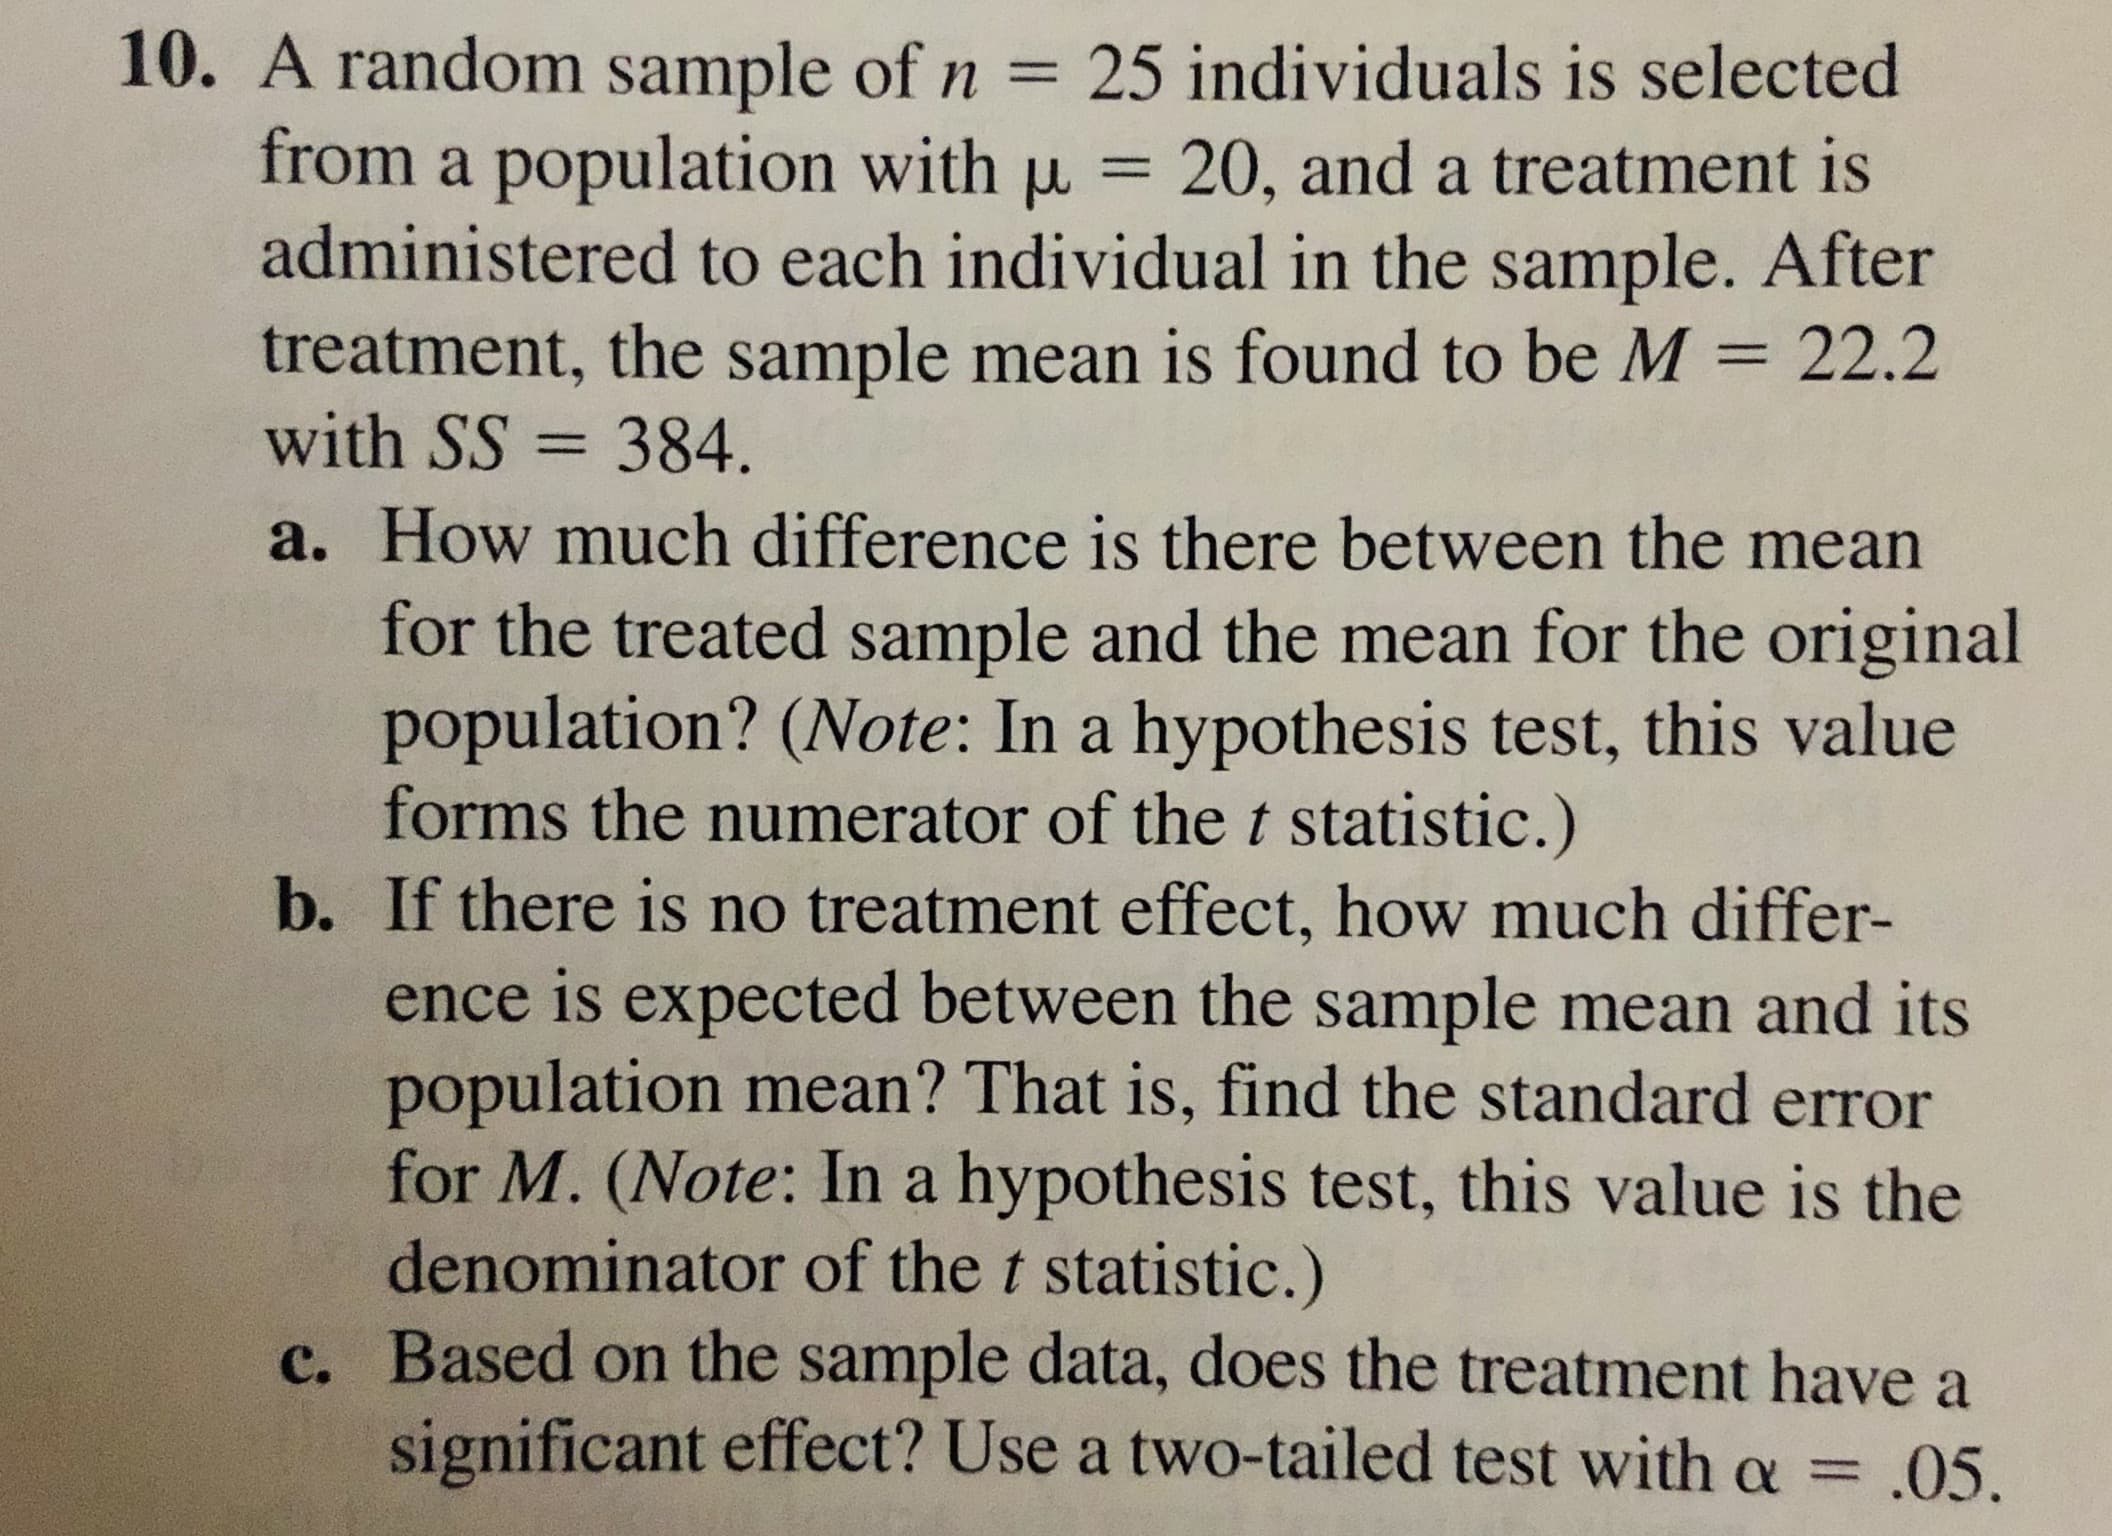 10. A random sample of n = 25 individuals is selected
from a population with u = 20, and a treatment is
administered to each individual in the sample. After
treatment, the sample mean is found to be M = 22.2
with SS = 384.
%3D
a. How much difference is there between the mean
for the treated sample and the mean for the original
population? (Note: In a hypothesis test, this value
forms the numerator of thet statistic.)
b. If there is no treatment effect, how much differ-
ence is expected between the sample mean and its
population mean? That is, find the standard error
for M. (Note: In a hypothesis test, this value is the
denominator of the t statistic.)
c. Based on the sample data, does the treatment have a
significant effect? Use a two-tailed test with a =
.05.
